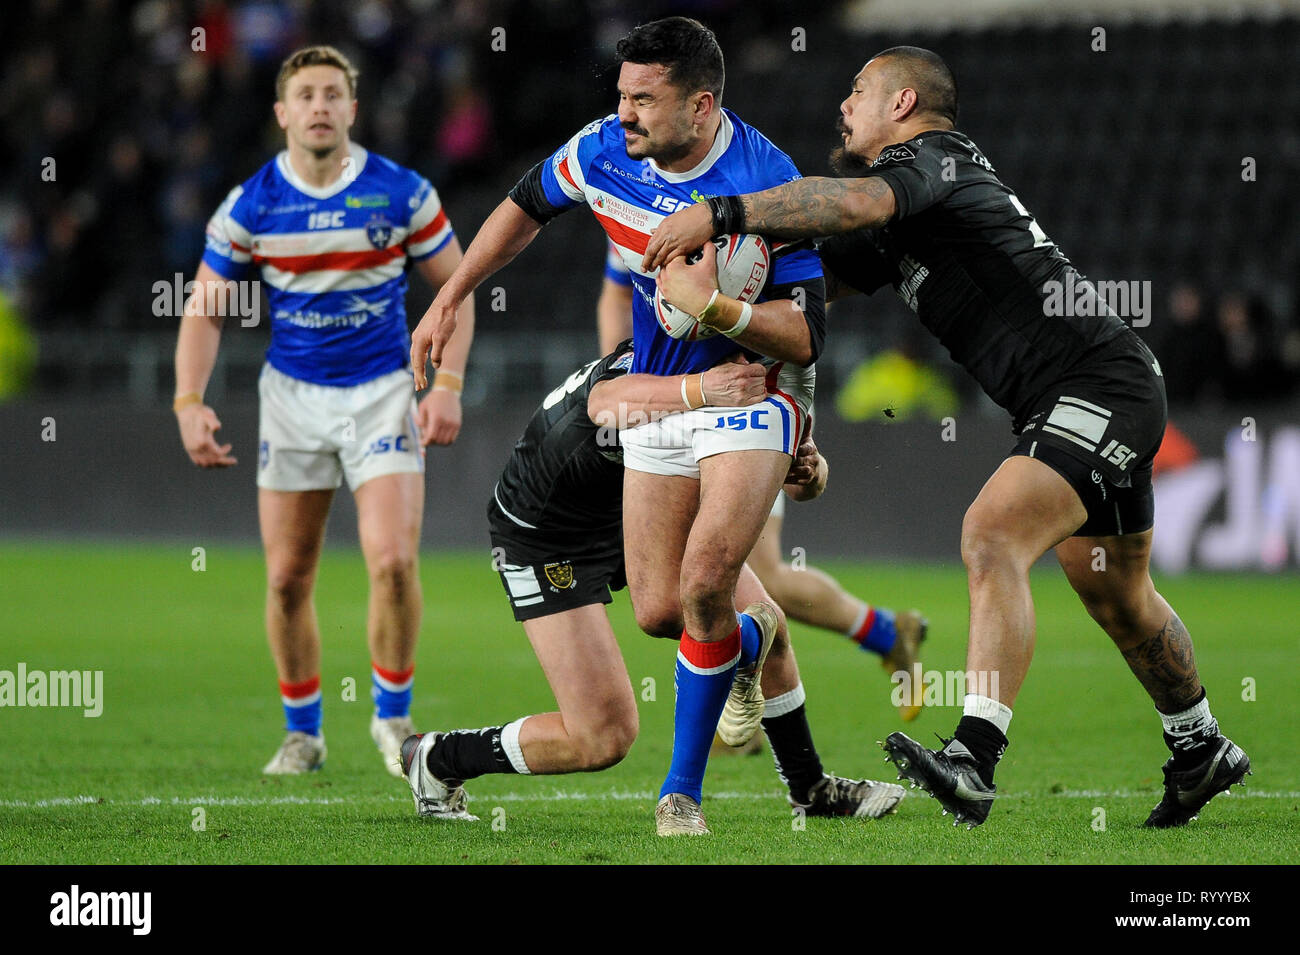 Hull, Royaume-Uni, 15 3 2019. 15 mars 2019. KCOM Stadium, Hull, Angleterre ; Rugby League Super League Betfred, Hull FC vs Wakefield Trinity ; Justin Horo mène un autre Wakefield Trinity attaque. Crédit : Dean Dean Williams Williams/Alamy Live News Banque D'Images